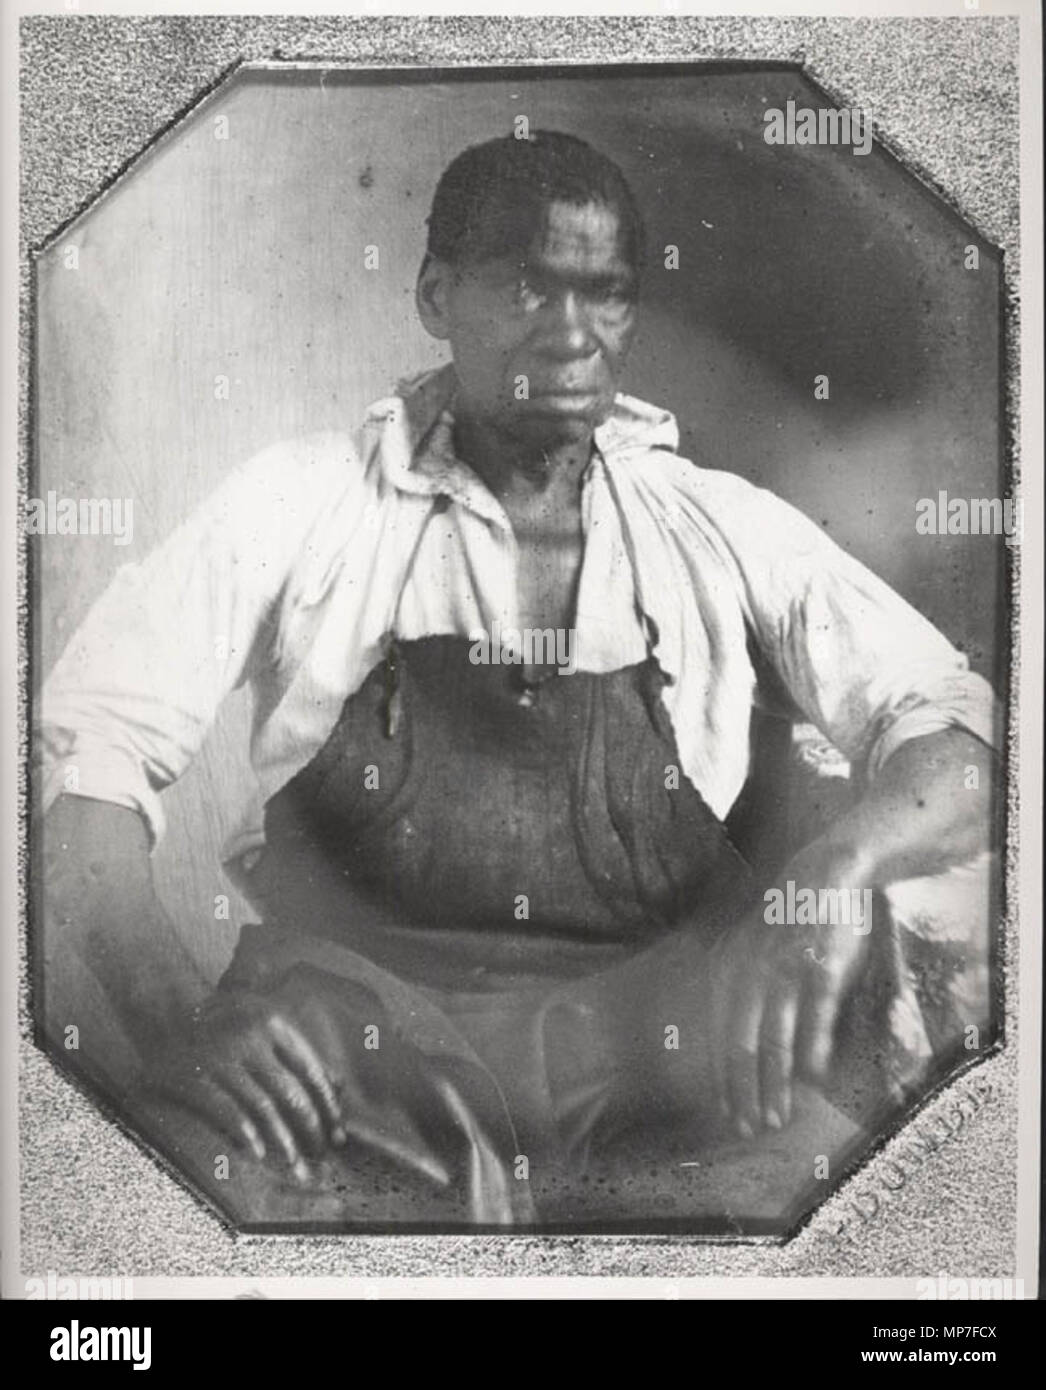 . Daguerreotype of Isaac Jefferson by John Plumbe, Jr. Petersburg, VA, ca. 1845. Albert H. Small Special Collections Library. University of Virginia. Charlottesville VA. circa 1845.   John Plumbe  (1809–1857)     Alternative names John Plumbe, Jr.  Description American photographer and publisher  Date of birth/death 13 July 1809 28 May 1857  Location of birth/death Powys Dubuque  Work location Washington, D.C. (1840), California (1849-1854), Dubuque, Iowa (1854-1857)  Authority control  : Q3512144 VIAF: 17088044 ULAN: 500028739 LCCN: nr92028530 RKD: 387496 WorldCat 677 IssacJefferson ca1845 by Stock Photo